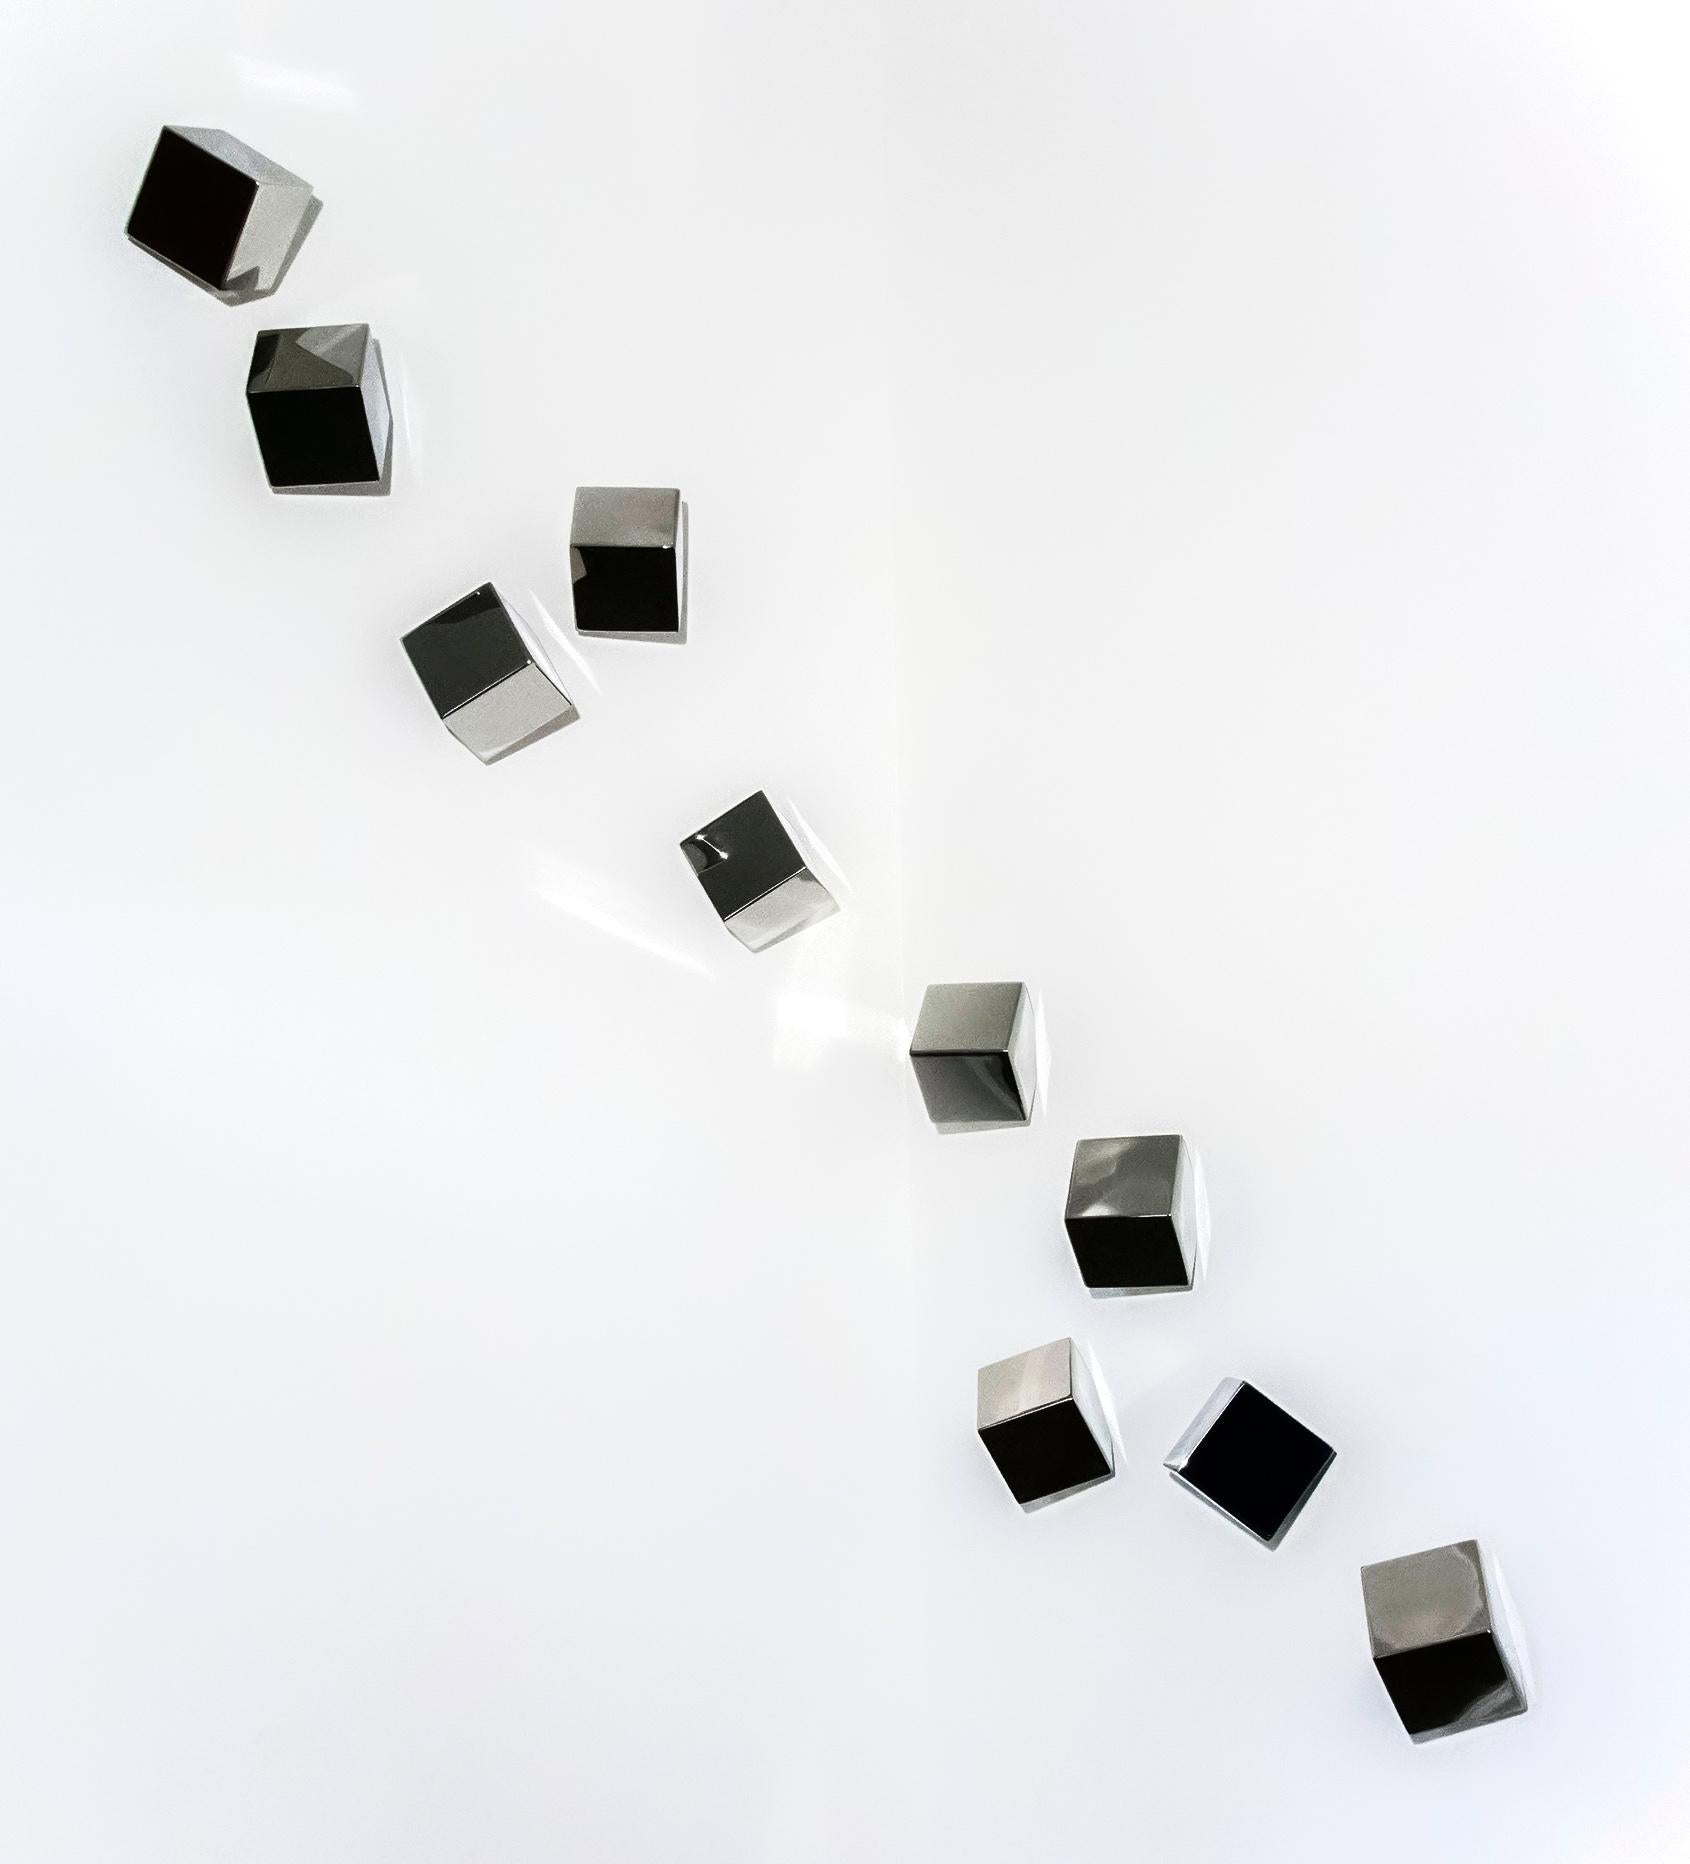 Change - multiple, polished stainless steel, cubes, abstract, wall sculpture - Sculpture by  Lori Cozen-Geller